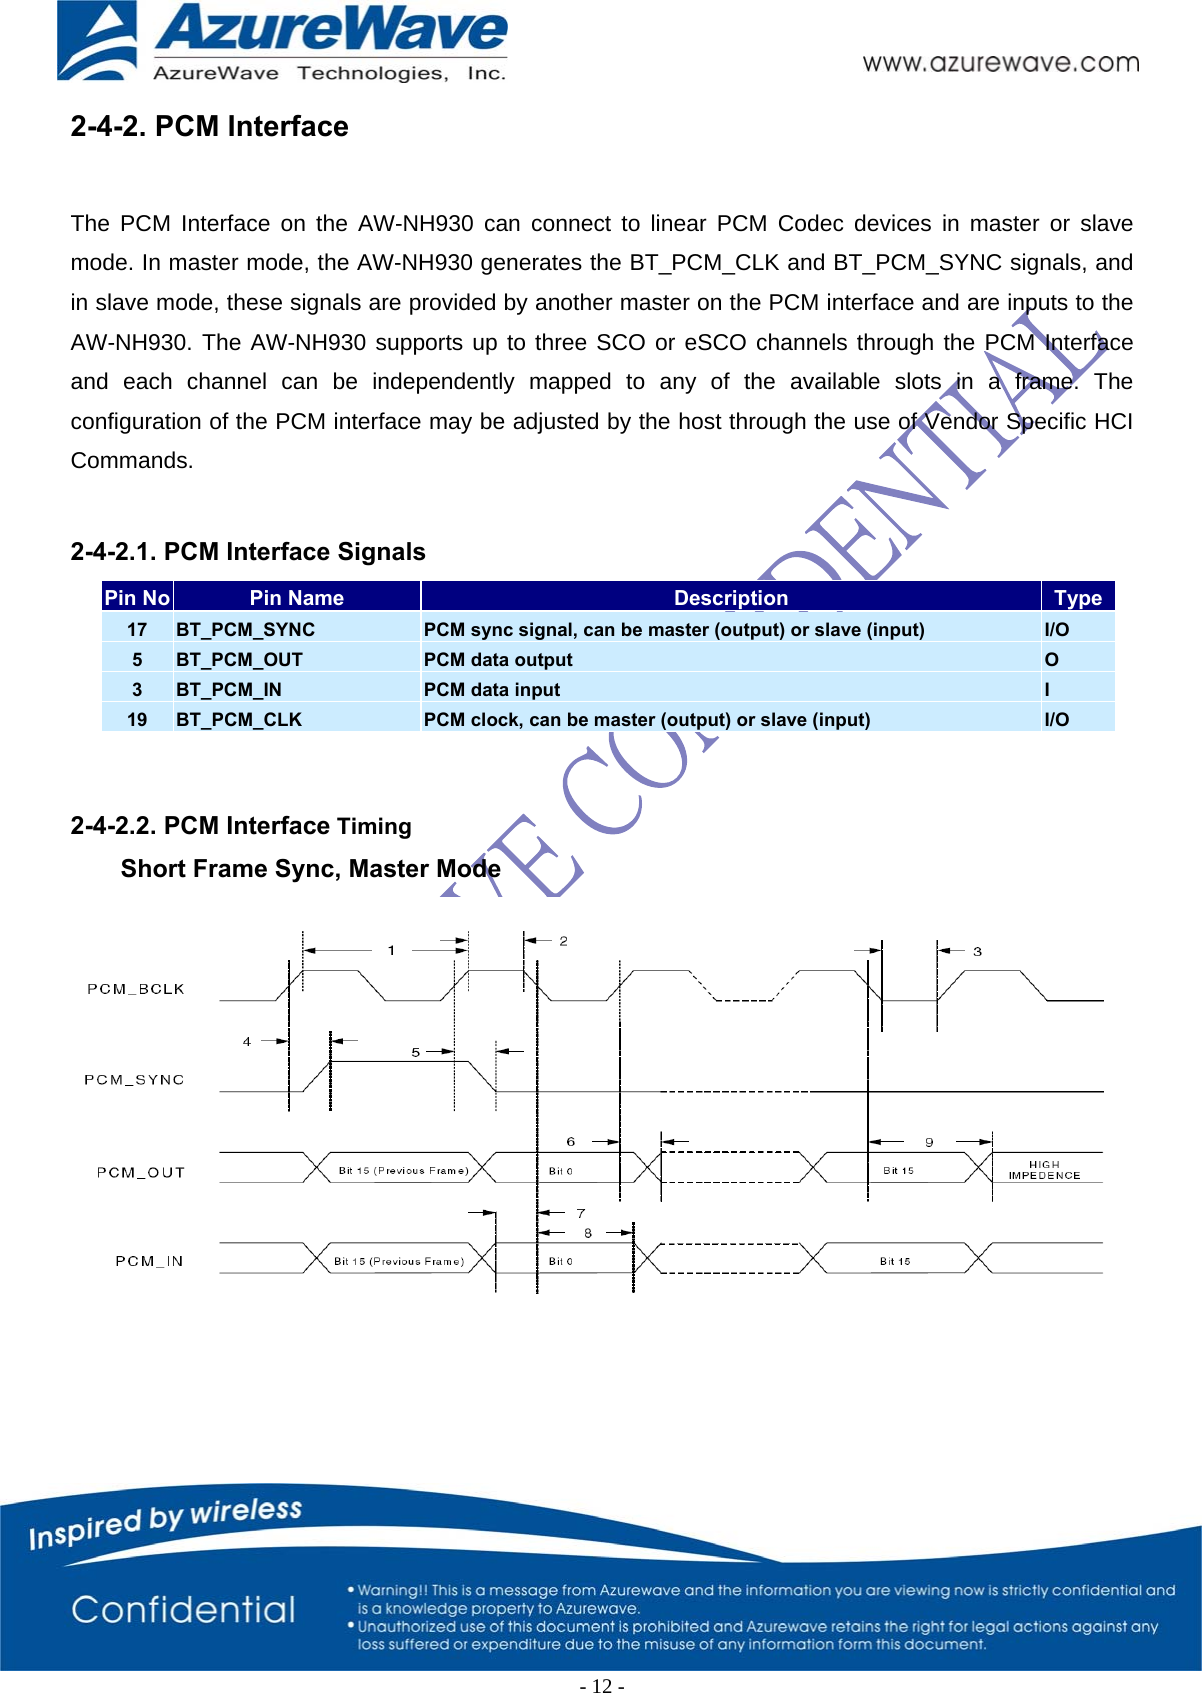  2-4-2. PCM Interface   The PCM Interface on the AW-NH930 can connect to linear PCM Codec devices in master or slave mode. In master mode, the AW-NH930 generates the BT_PCM_CLK and BT_PCM_SYNC signals, and in slave mode, these signals are provided by another master on the PCM interface and are inputs to the AW-NH930. The AW-NH930 supports up to three SCO or eSCO channels through the PCM Interface and each channel can be independently mapped to any of the available slots in a frame. The configuration of the PCM interface may be adjusted by the host through the use of Vendor Specific HCI Commands.  2-4-2.1. PCM Interface Signals Pin No  Pin Name  Description  Type17  BT_PCM_SYNC  PCM sync signal, can be master (output) or slave (input)  I/O 5  BT_PCM_OUT  PCM data output  O 3  BT_PCM_IN  PCM data input  I 19  BT_PCM_CLK  PCM clock, can be master (output) or slave (input)  I/O   2-4-2.2. PCM Interface Timing Short Frame Sync, Master Mode  -12-